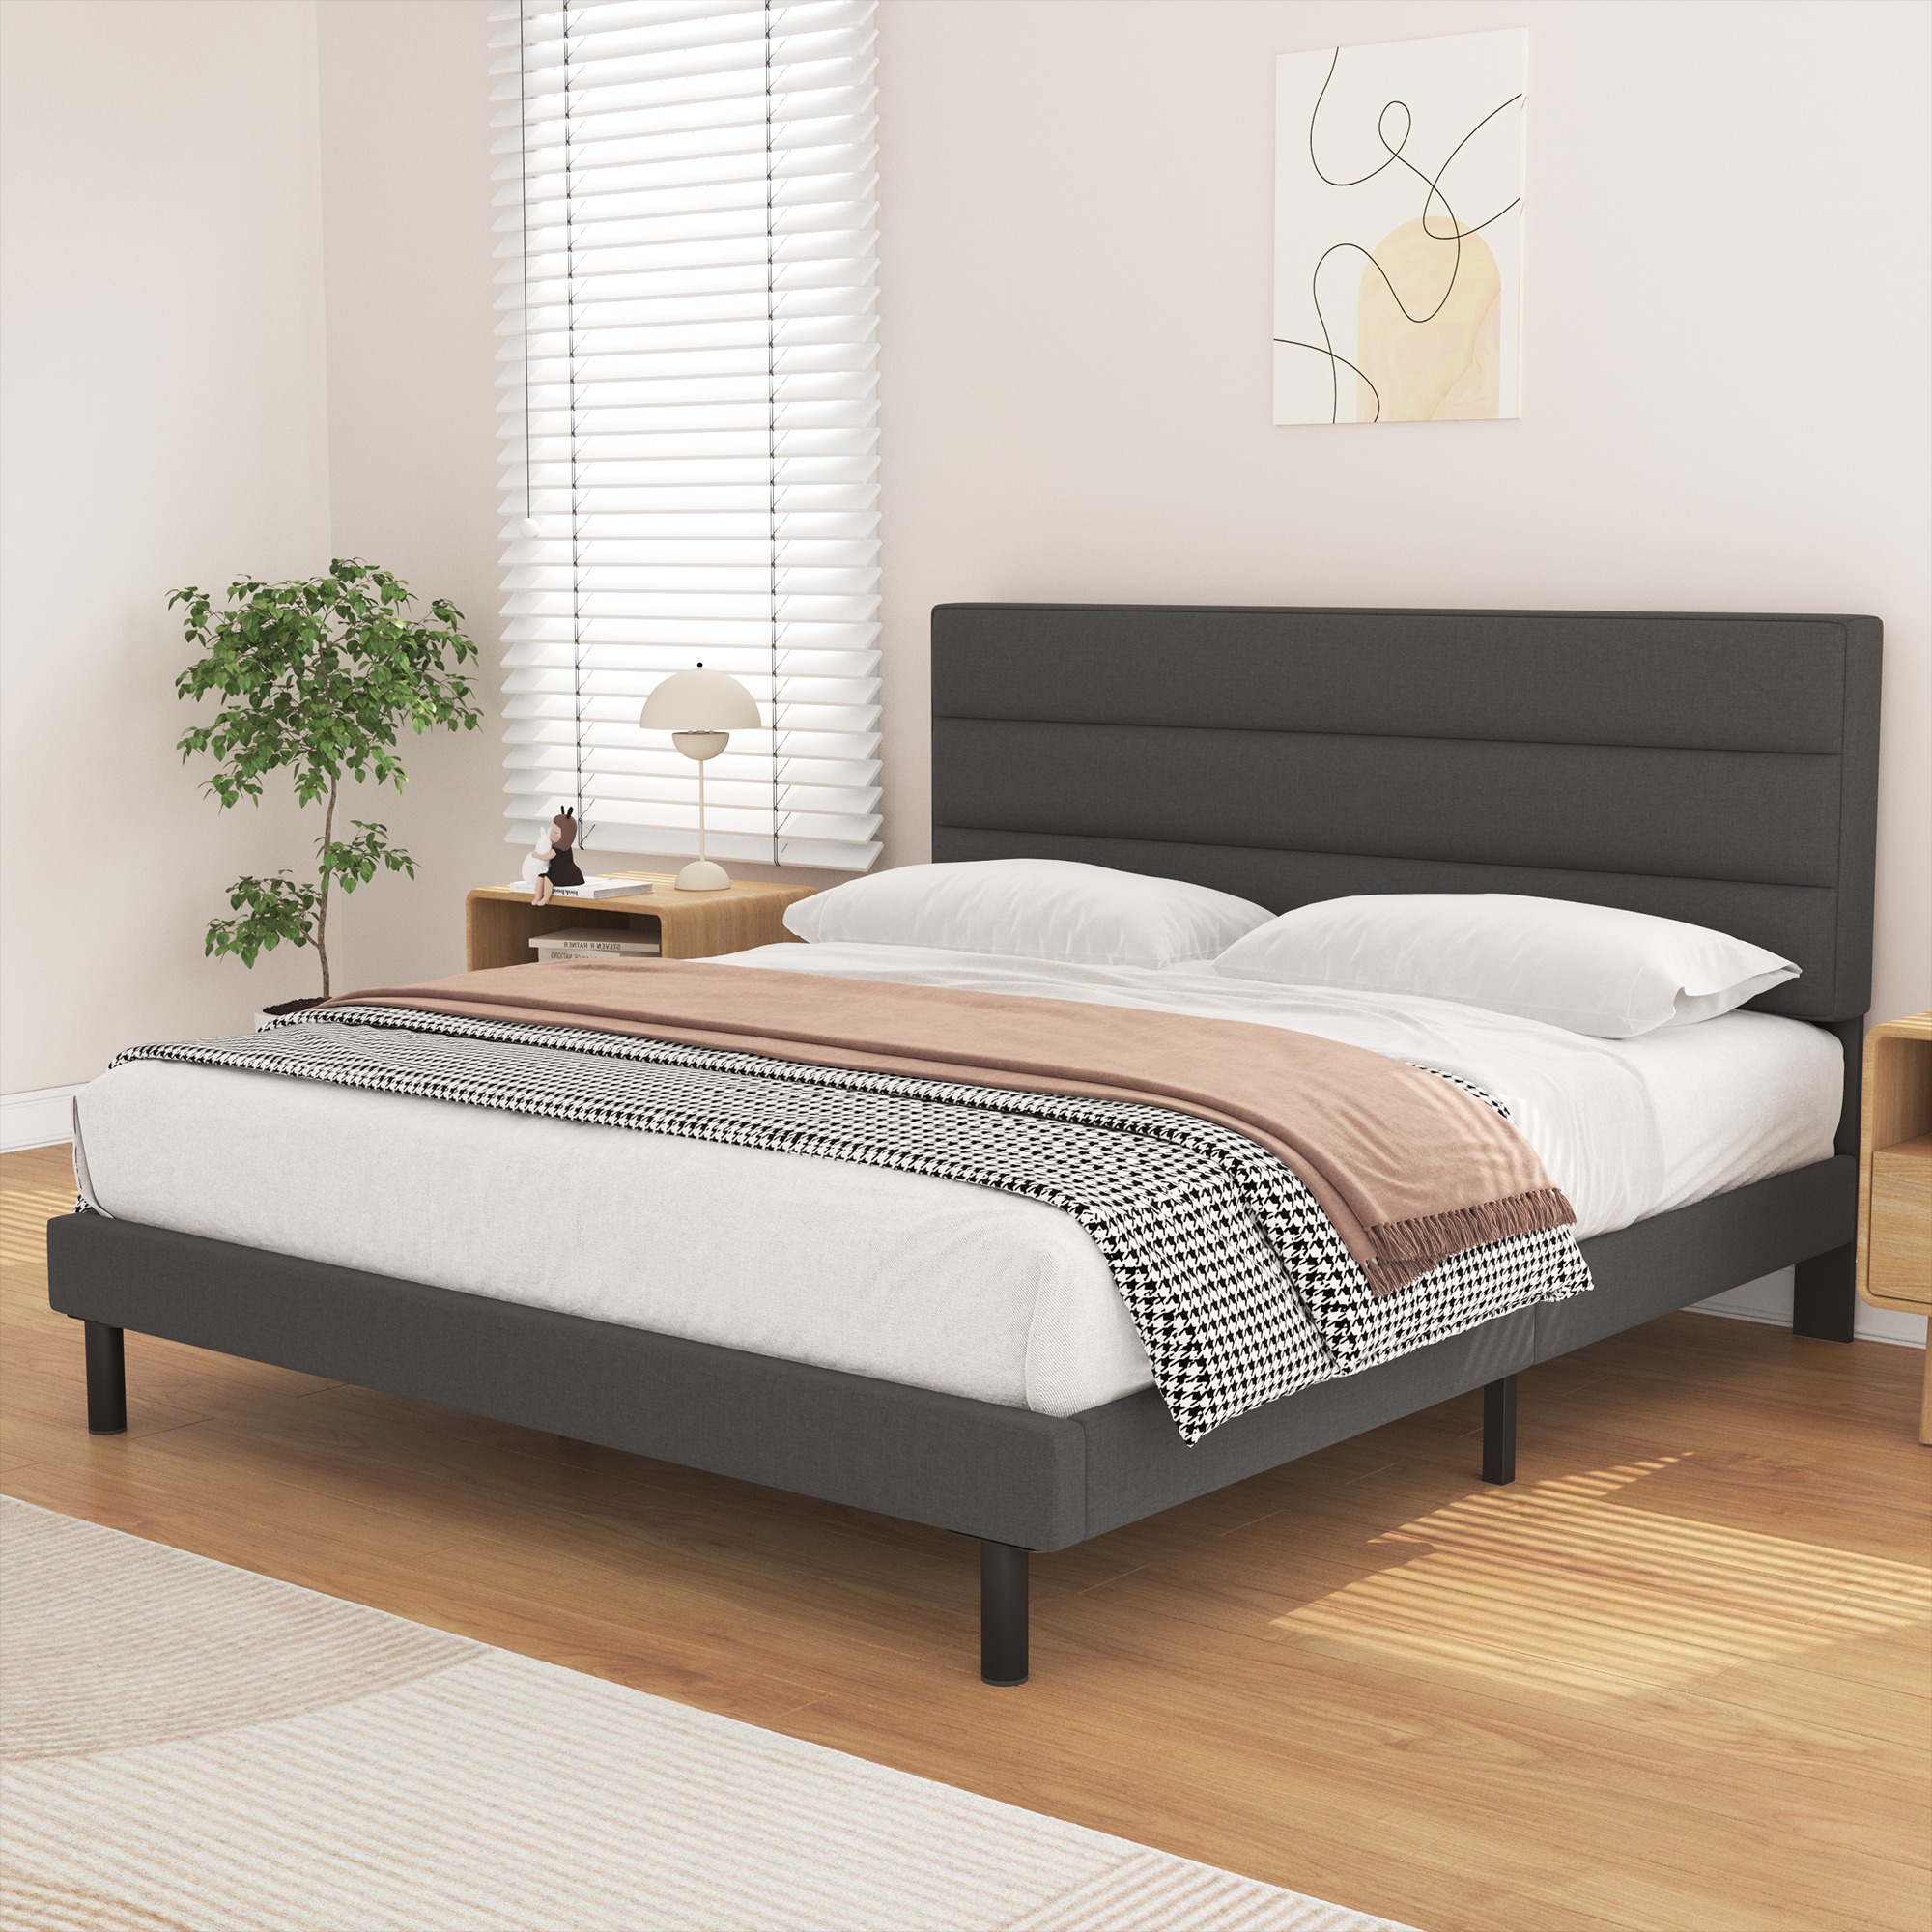 Twin Bed Frame, HAIIDE Twin Size Platform Bed with Wingback Fabric Upholstered Headboard, Dark Gray - image 3 of 8